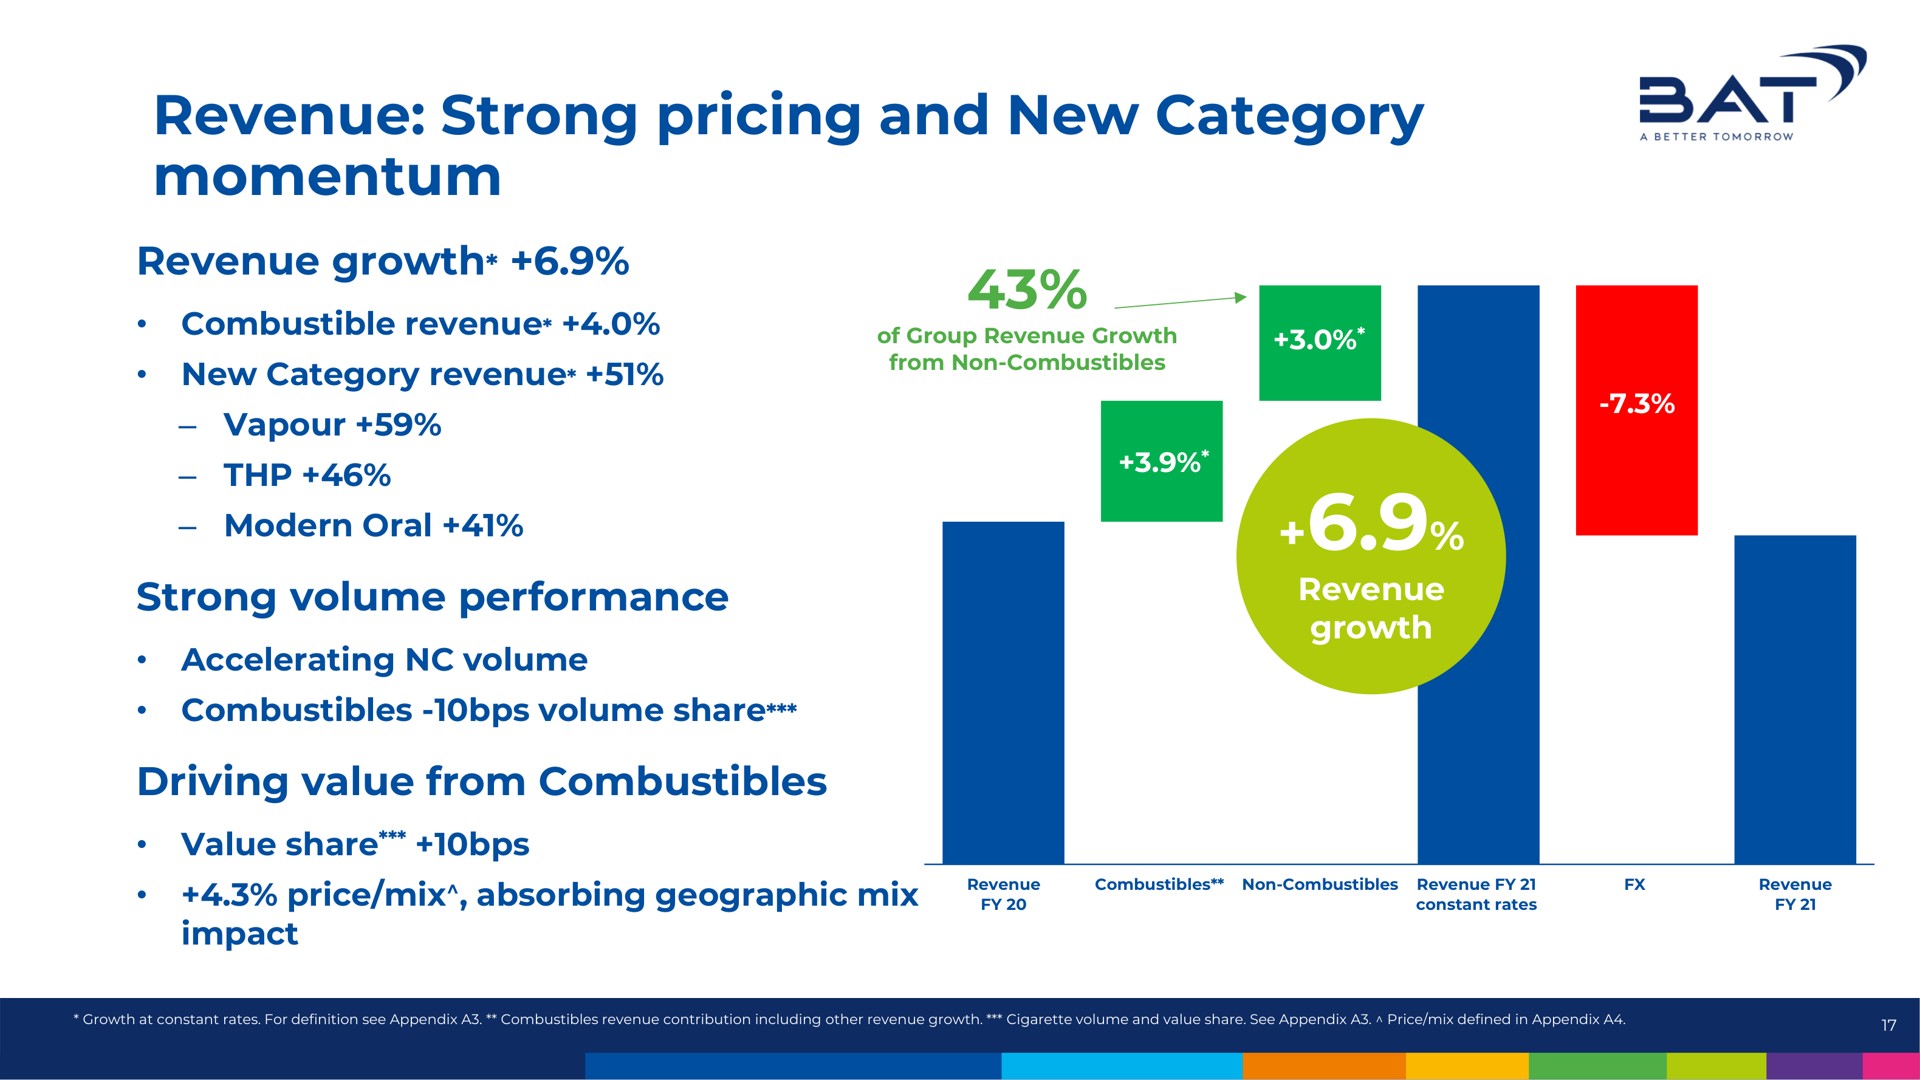 revenue strong pricing and new category momentum sai | BAT